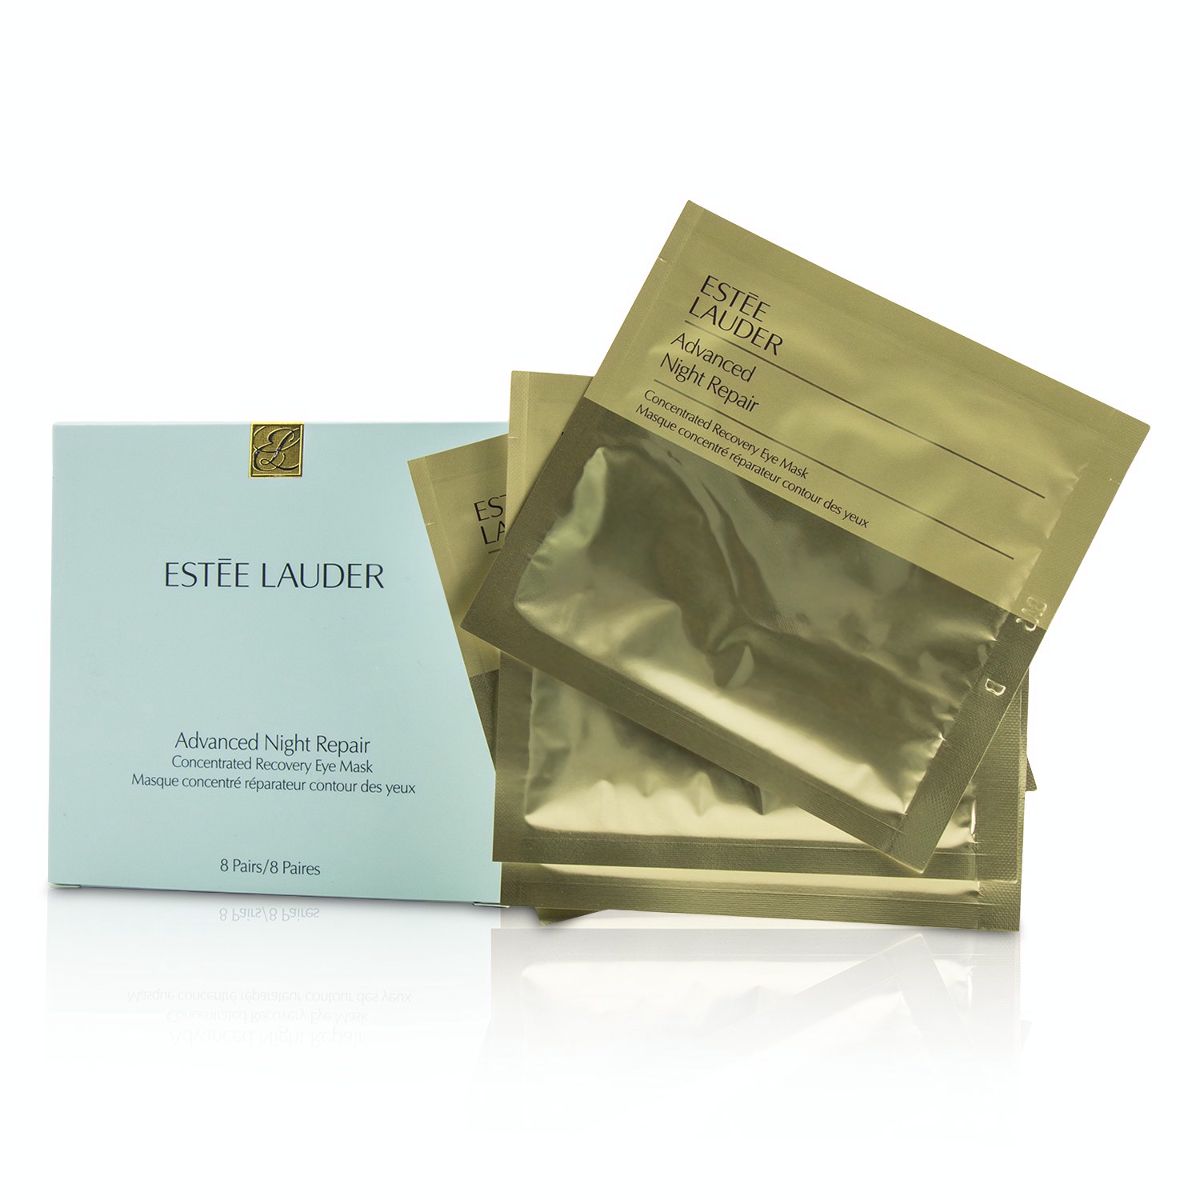 Advanced Night Repair Concentrated Recovery Eye Mask Estee Lauder Image